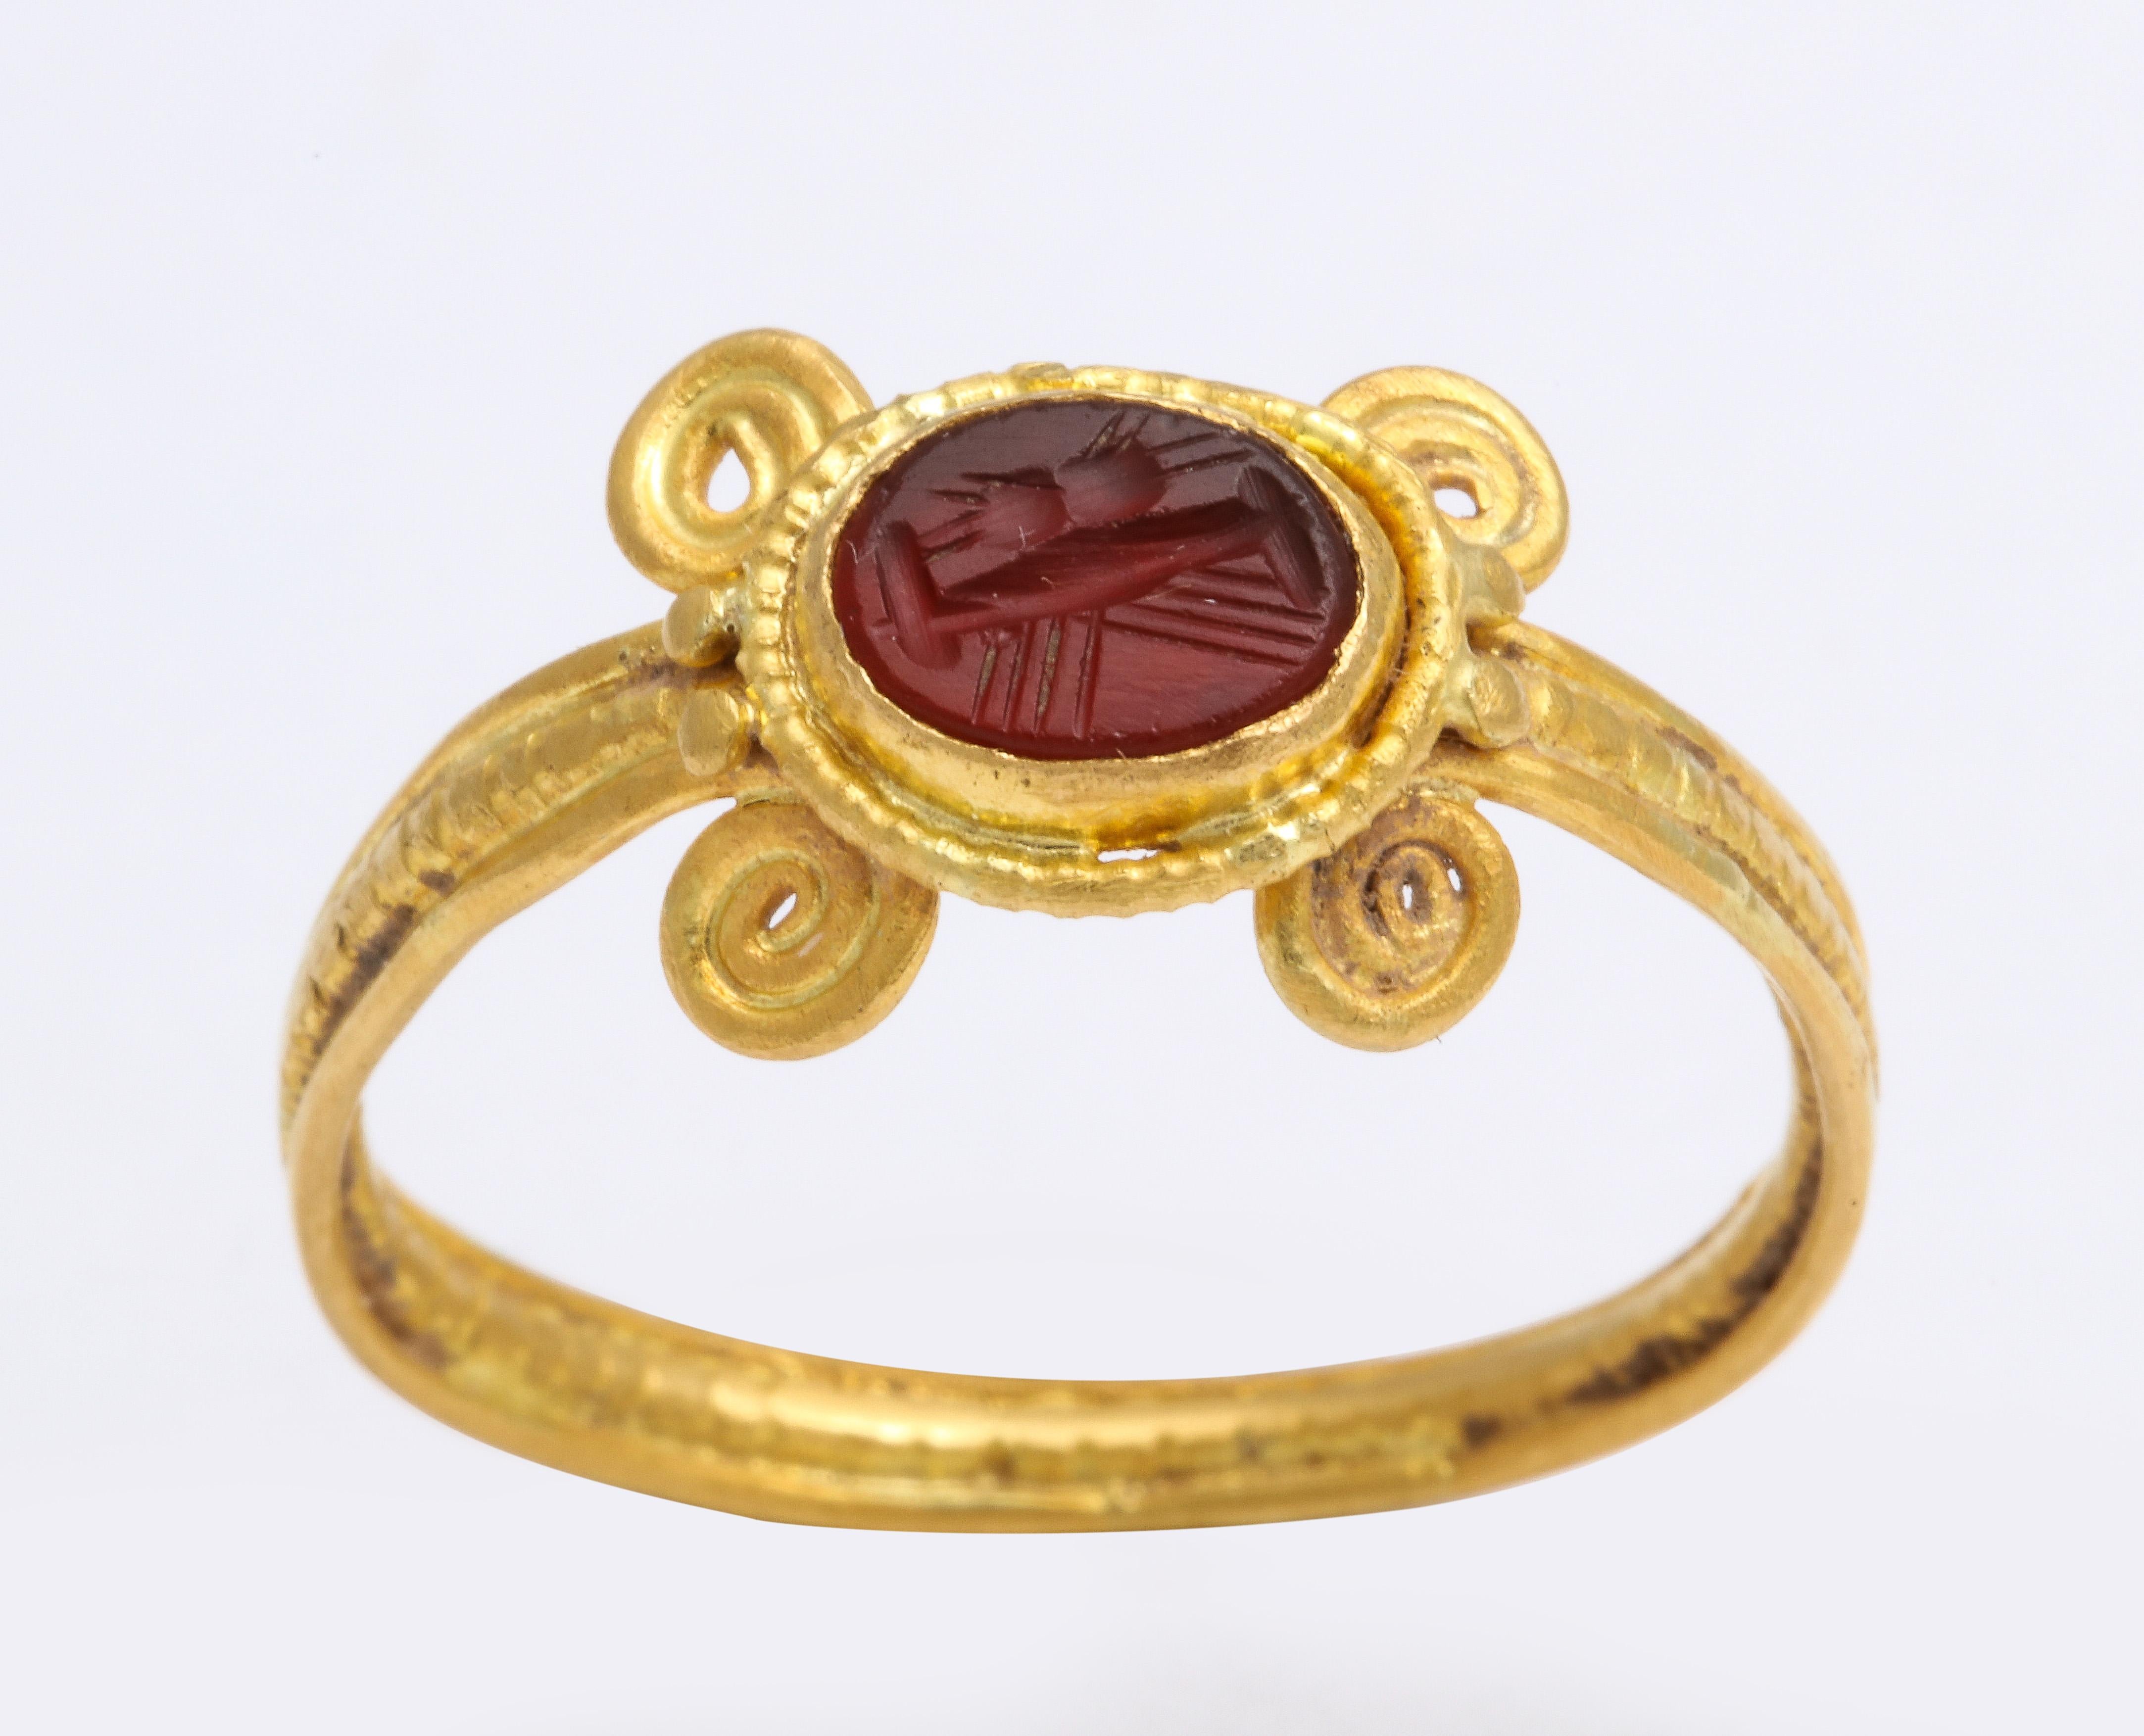 We are proud to show this circular hoop of 22 Kt gold, with coiling around the shoulders, sets an oval shaped intaglio